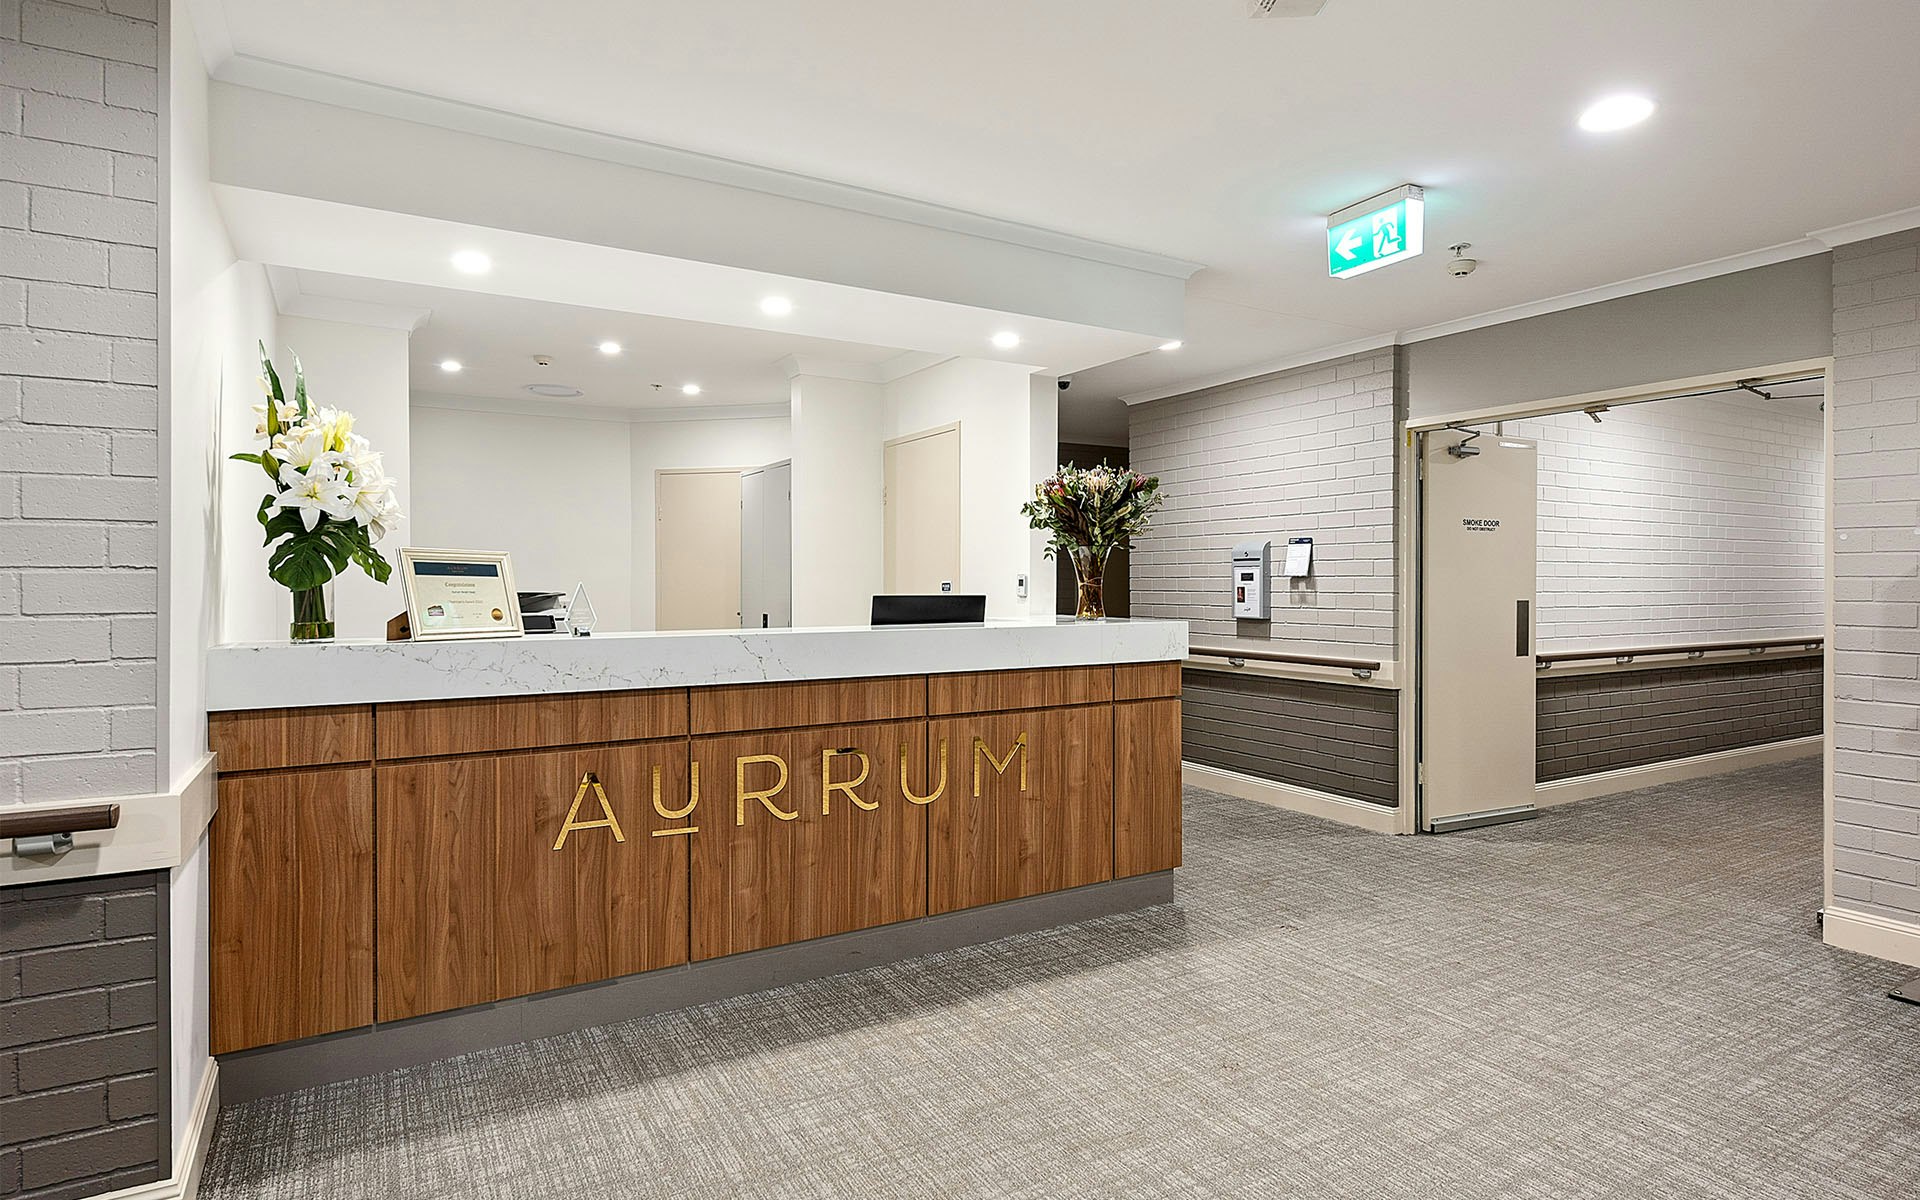 Aged-Cared-Completed-Projects Aurrum-Aged-Care aurrum-aged-care-project-bottom-of-page-image-1